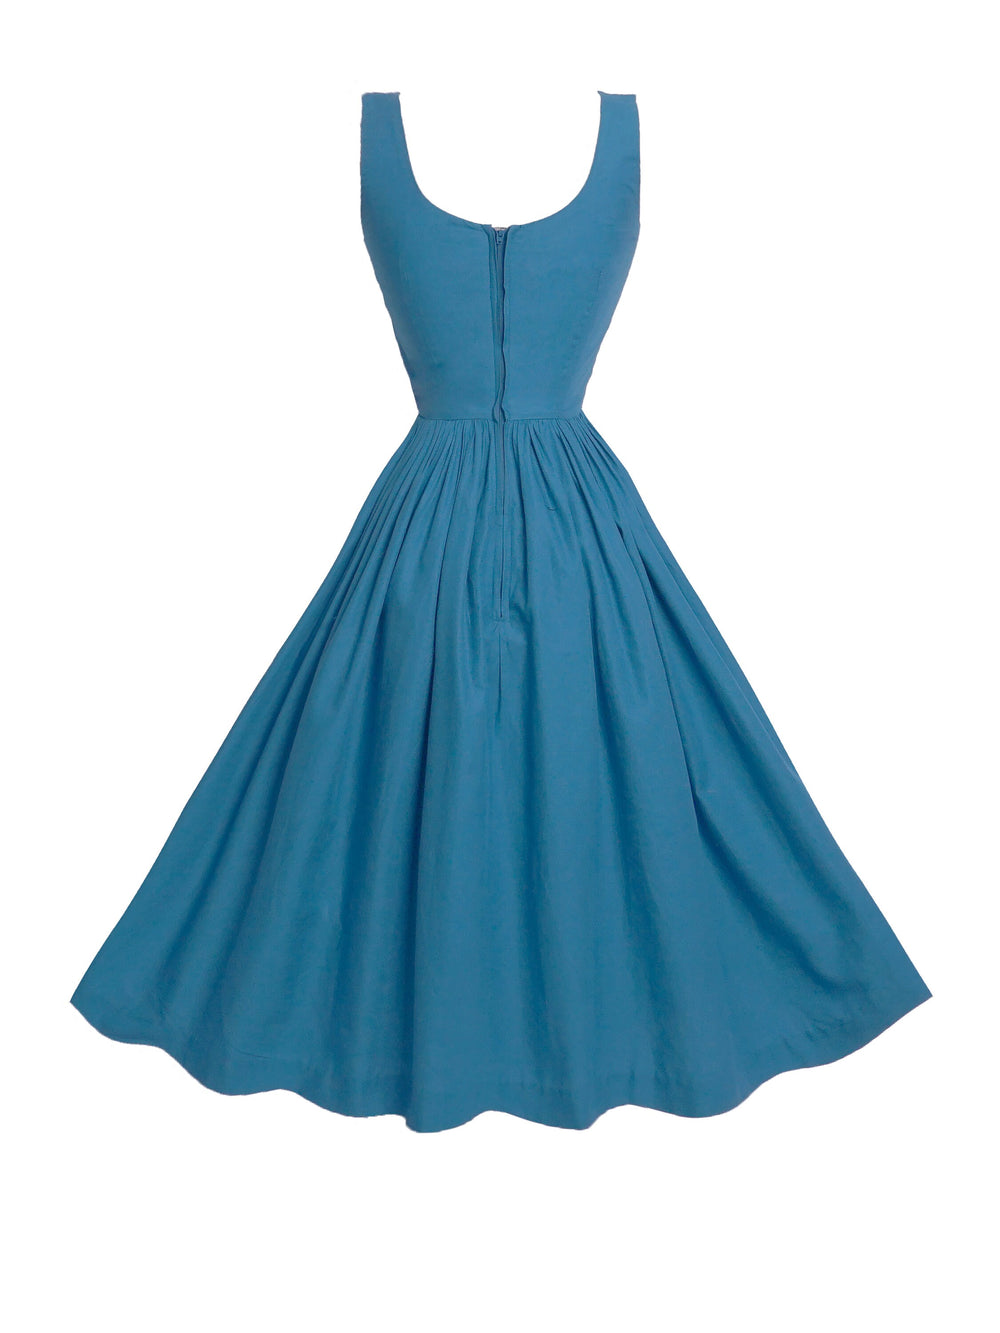 RTS - Size XS - Emily Dress in Air Force Blue Cotton